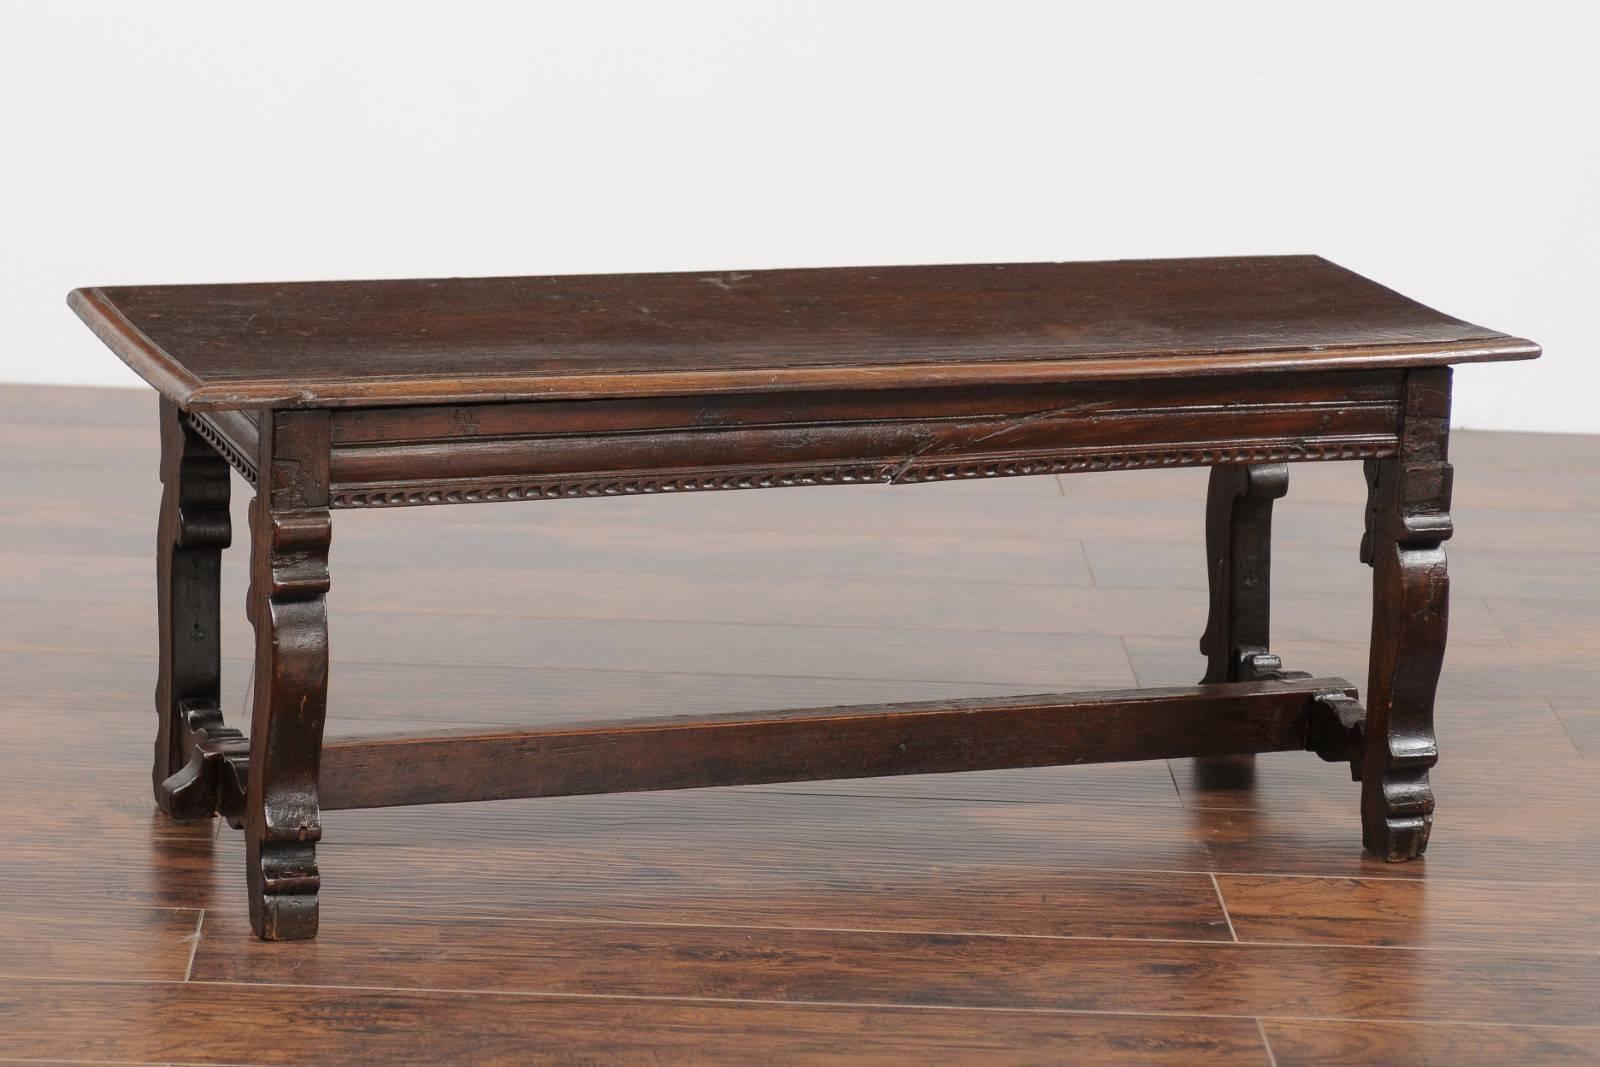 An Italian Baroque style walnut bench from the early 19th century with lyre shaped legs and cross stretcher. This Italian wooden bench features a rectangular single-plank seat with rounded edges, resting above a trestle base with lyre shaped legs,